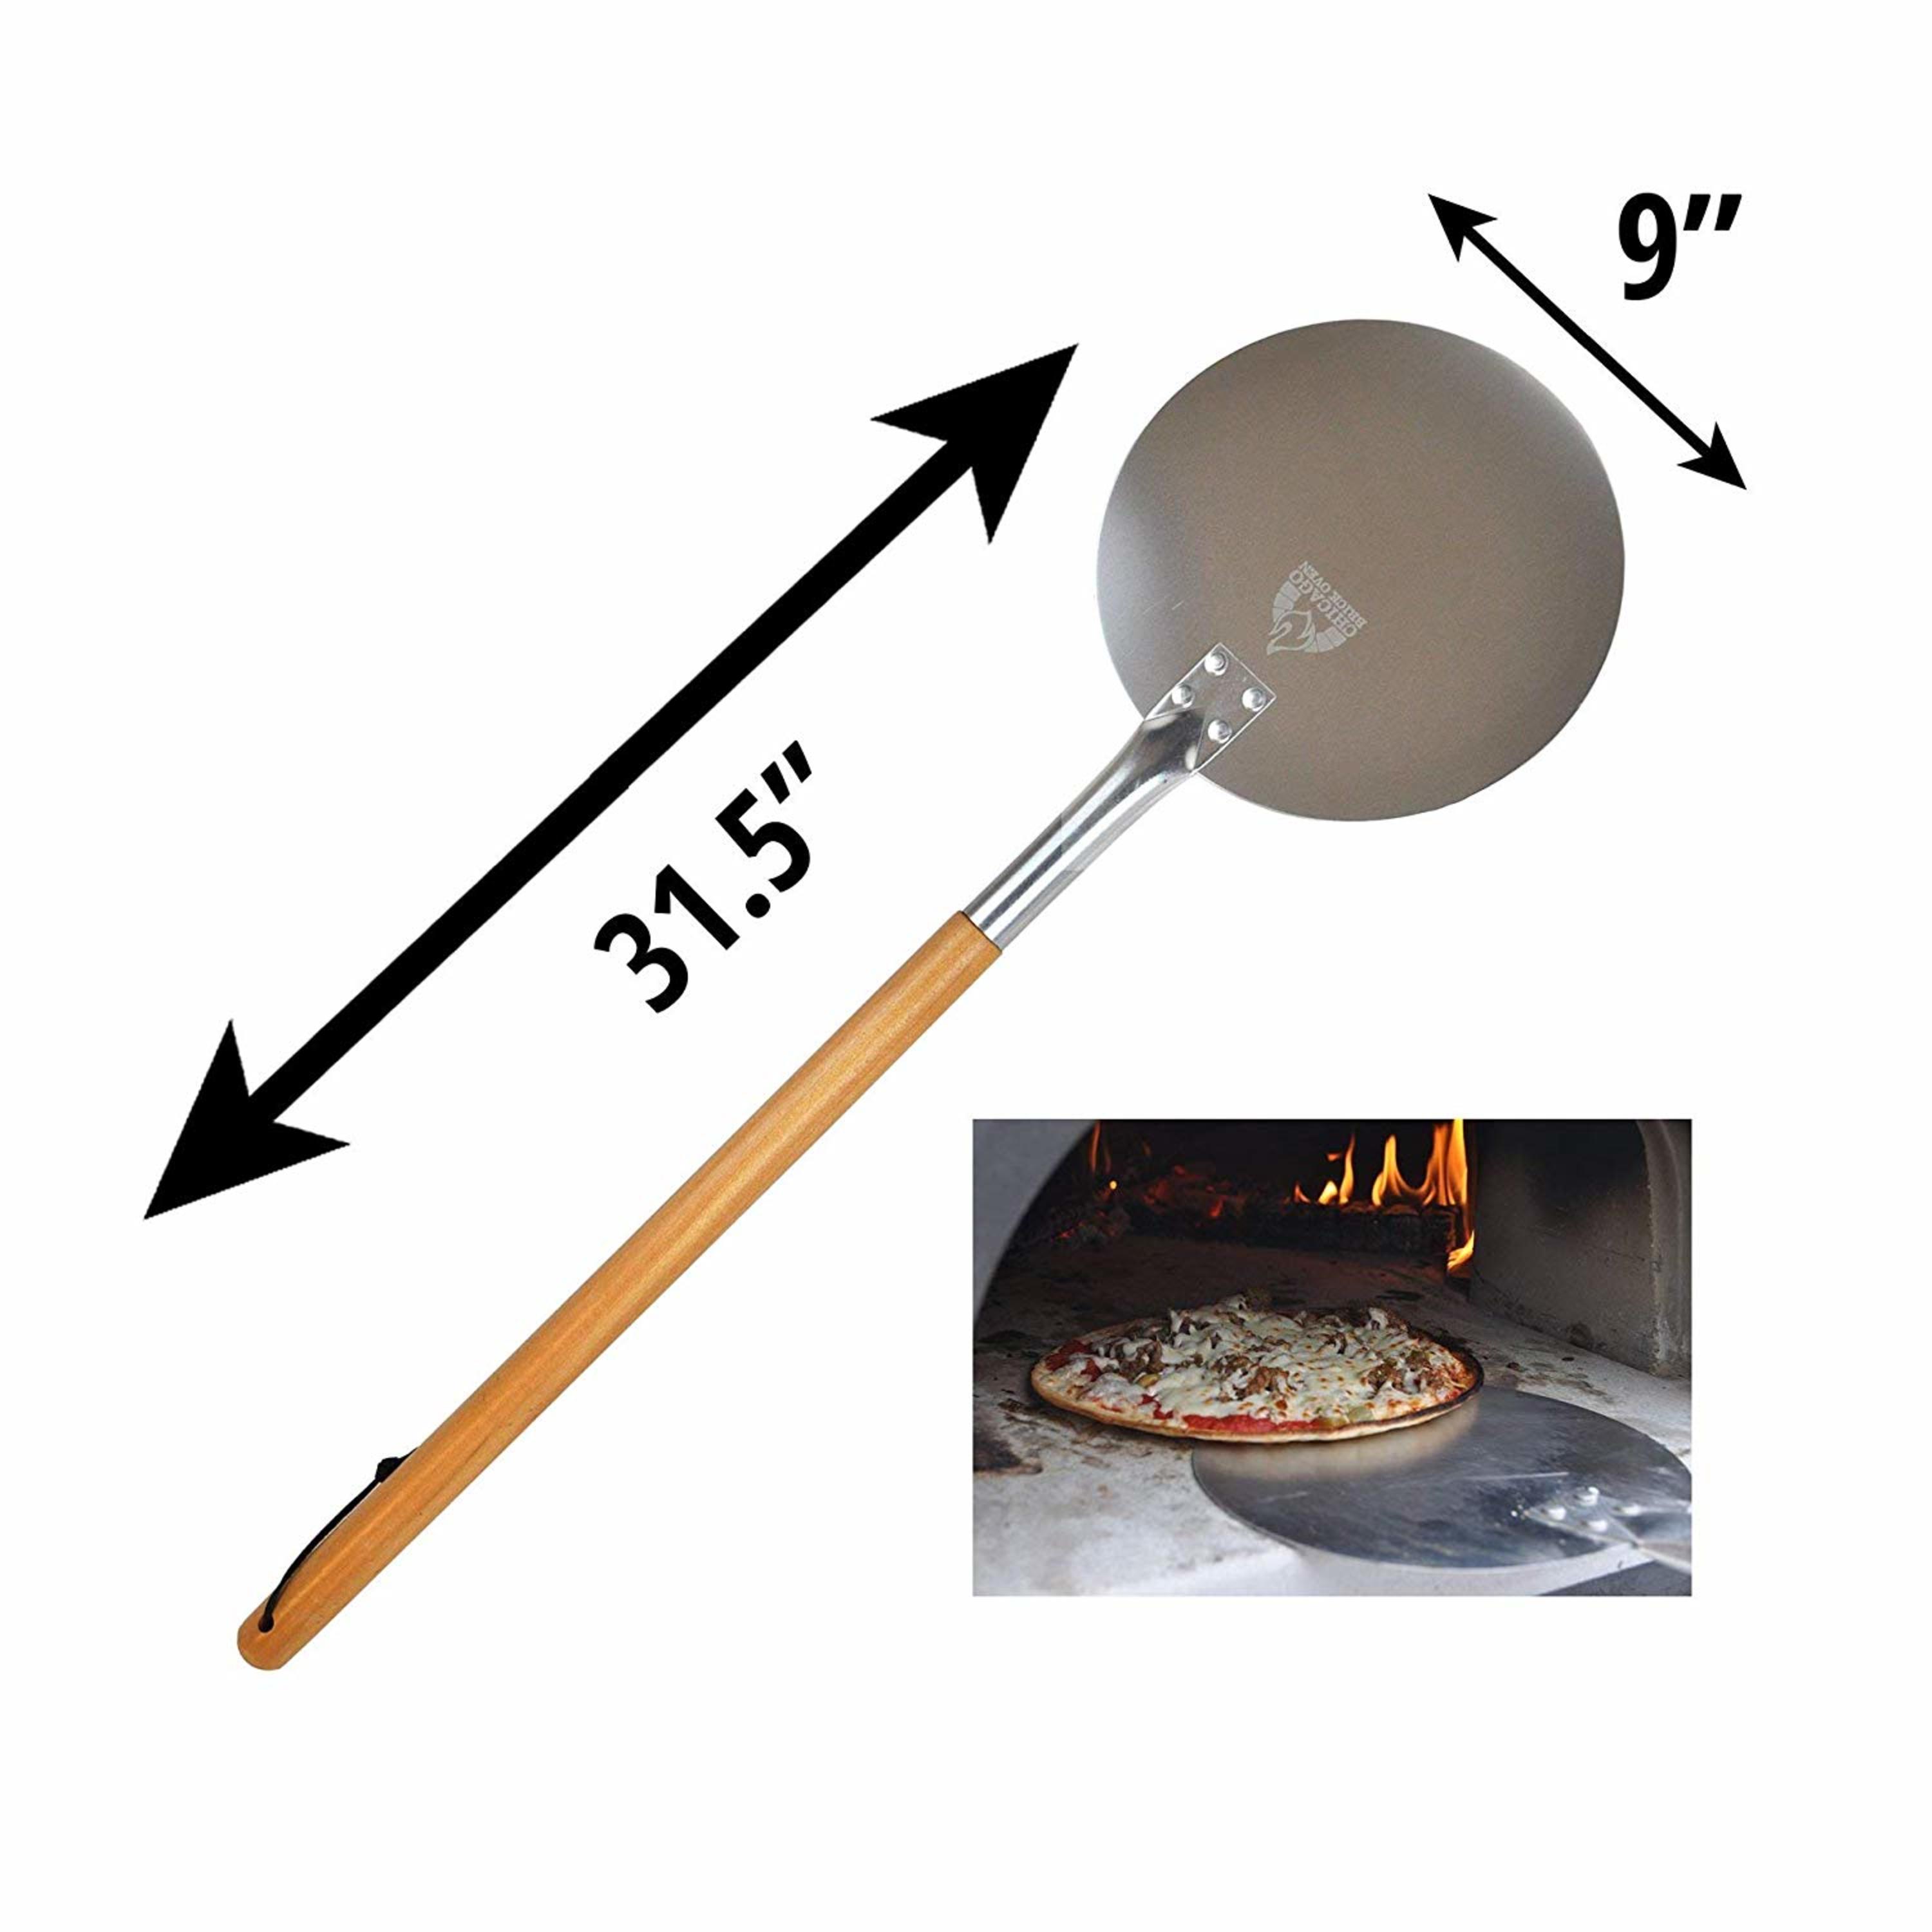 Aluminum Pizza Peel 9"- Turning Pizza Paddle with Leather Strap and Detachable Wood Handle - image 3 of 7